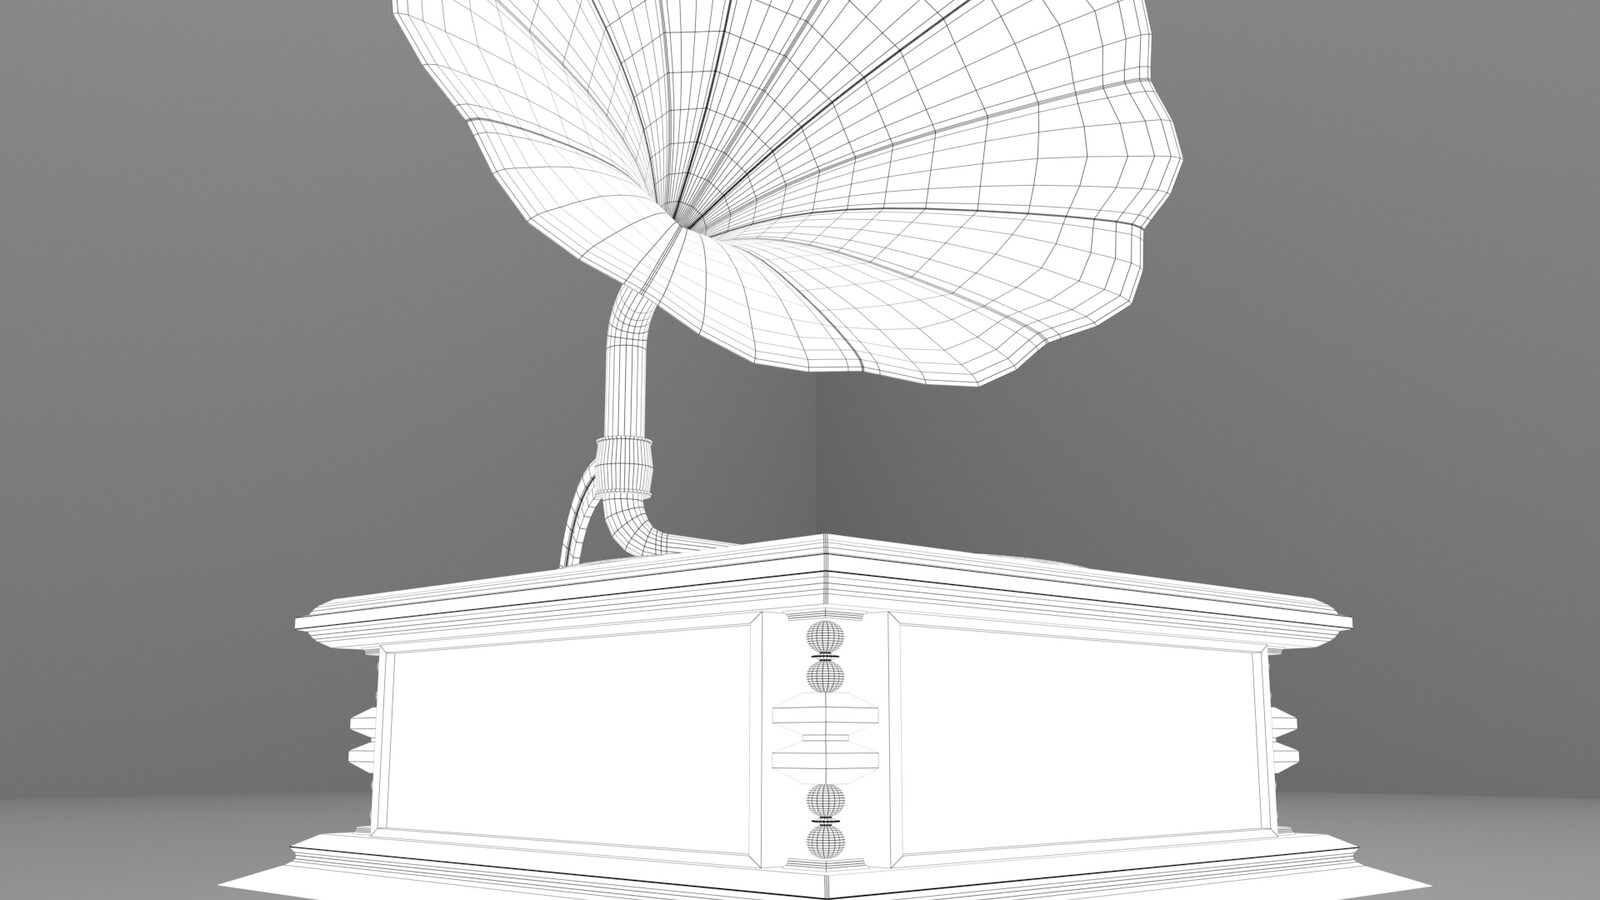 Wireframe render of the gramophone